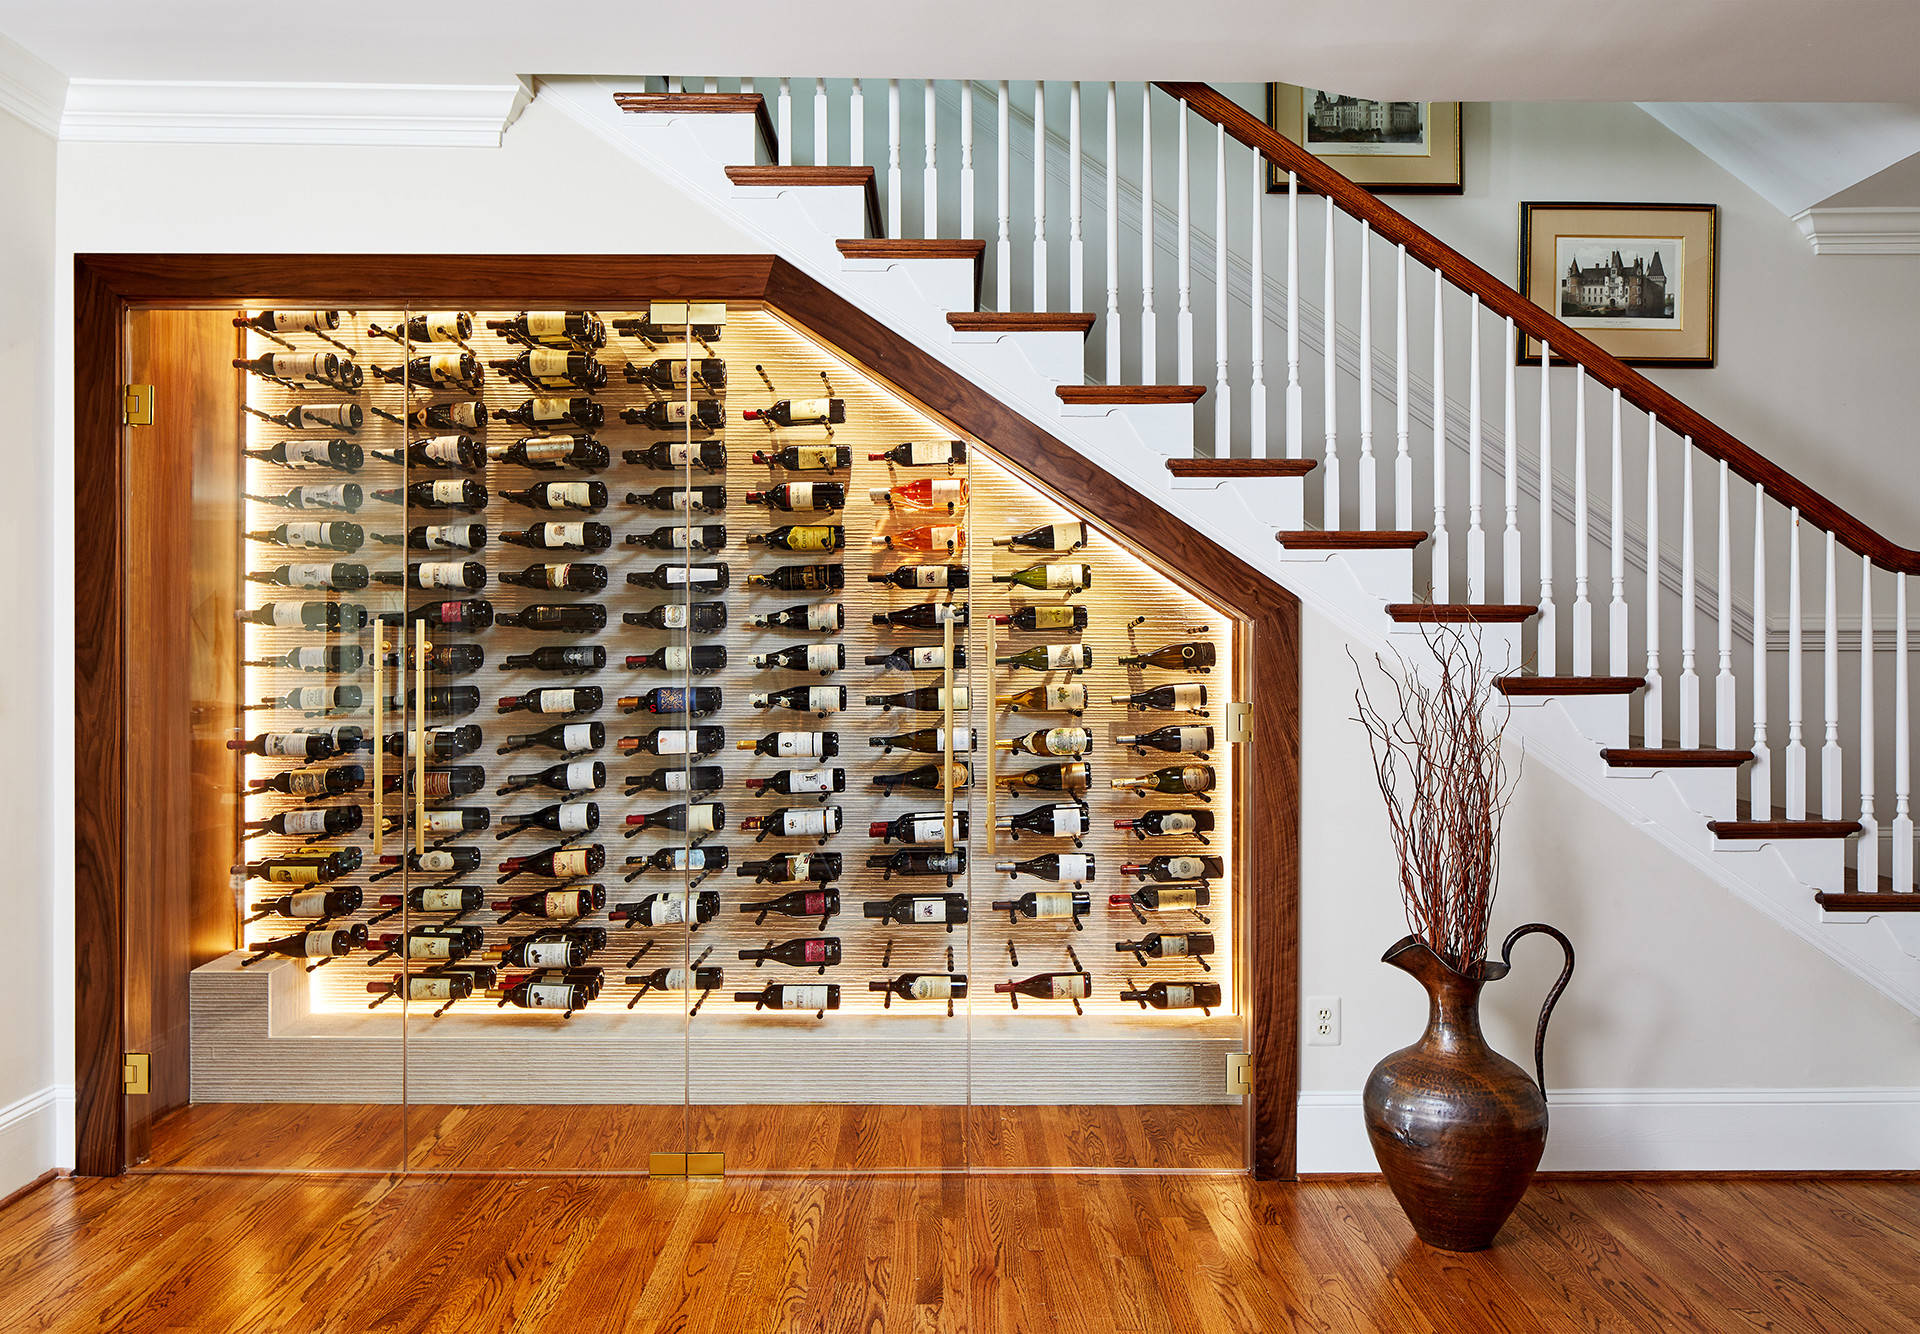 The Wine Cellar Reimagined: French inspired Spaces For The Connoisseur